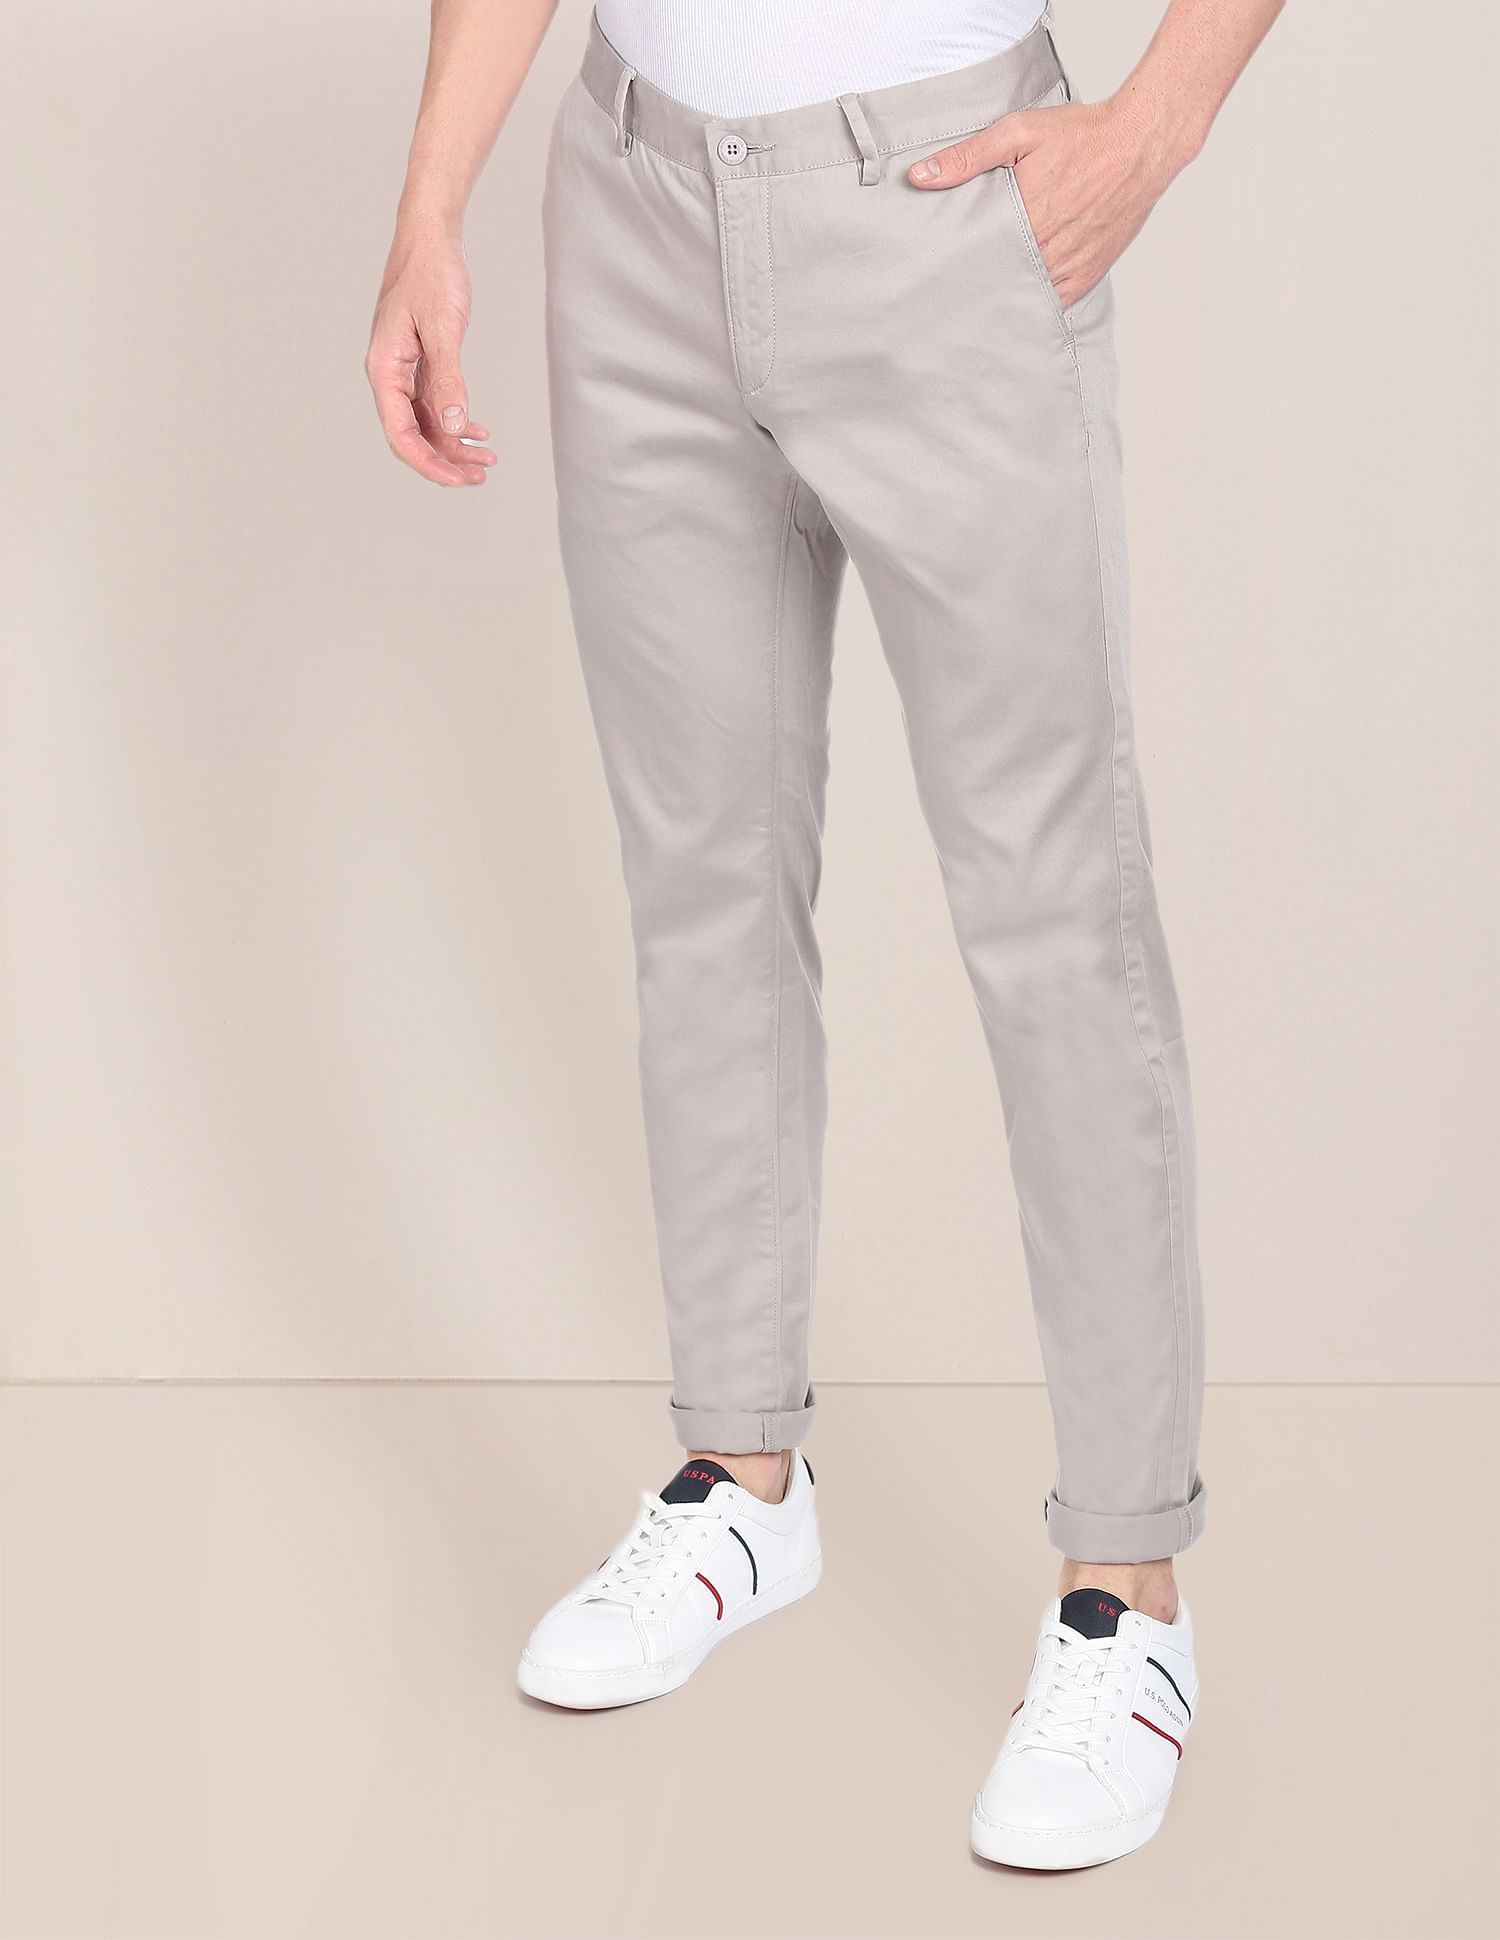 Buy U.S. Polo Assn. Austin Slim Fit Solid Trousers - NNNOW.com